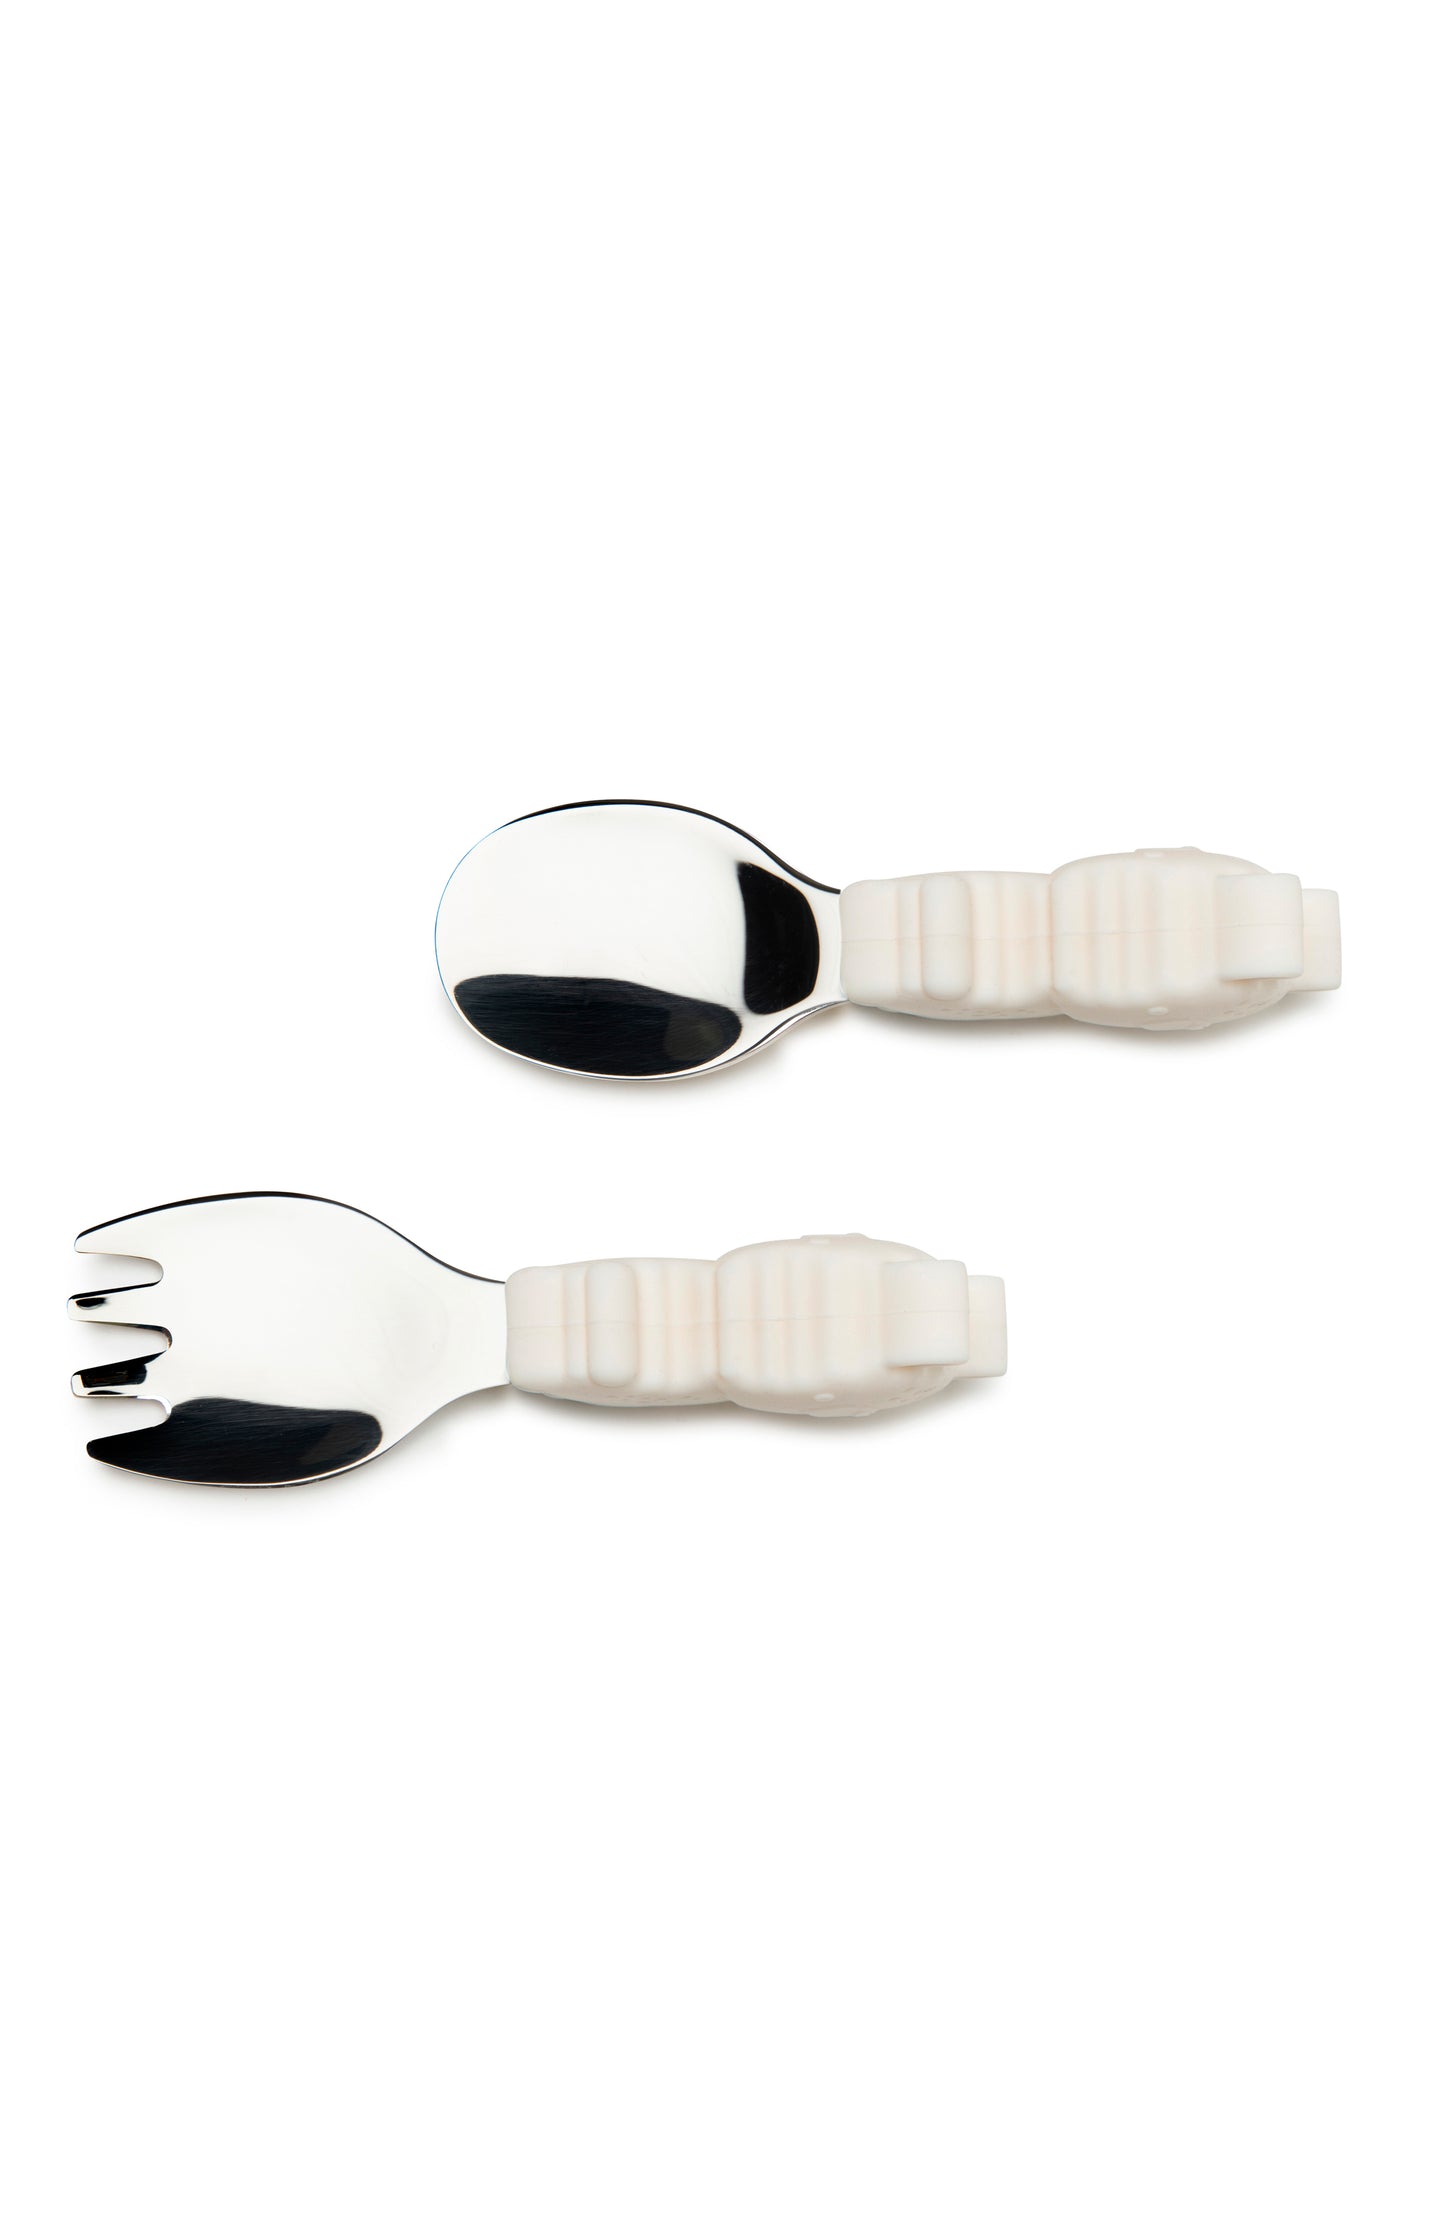 Born to Be Wild Learning Spoon/Fork Set - Loulou Lollipop